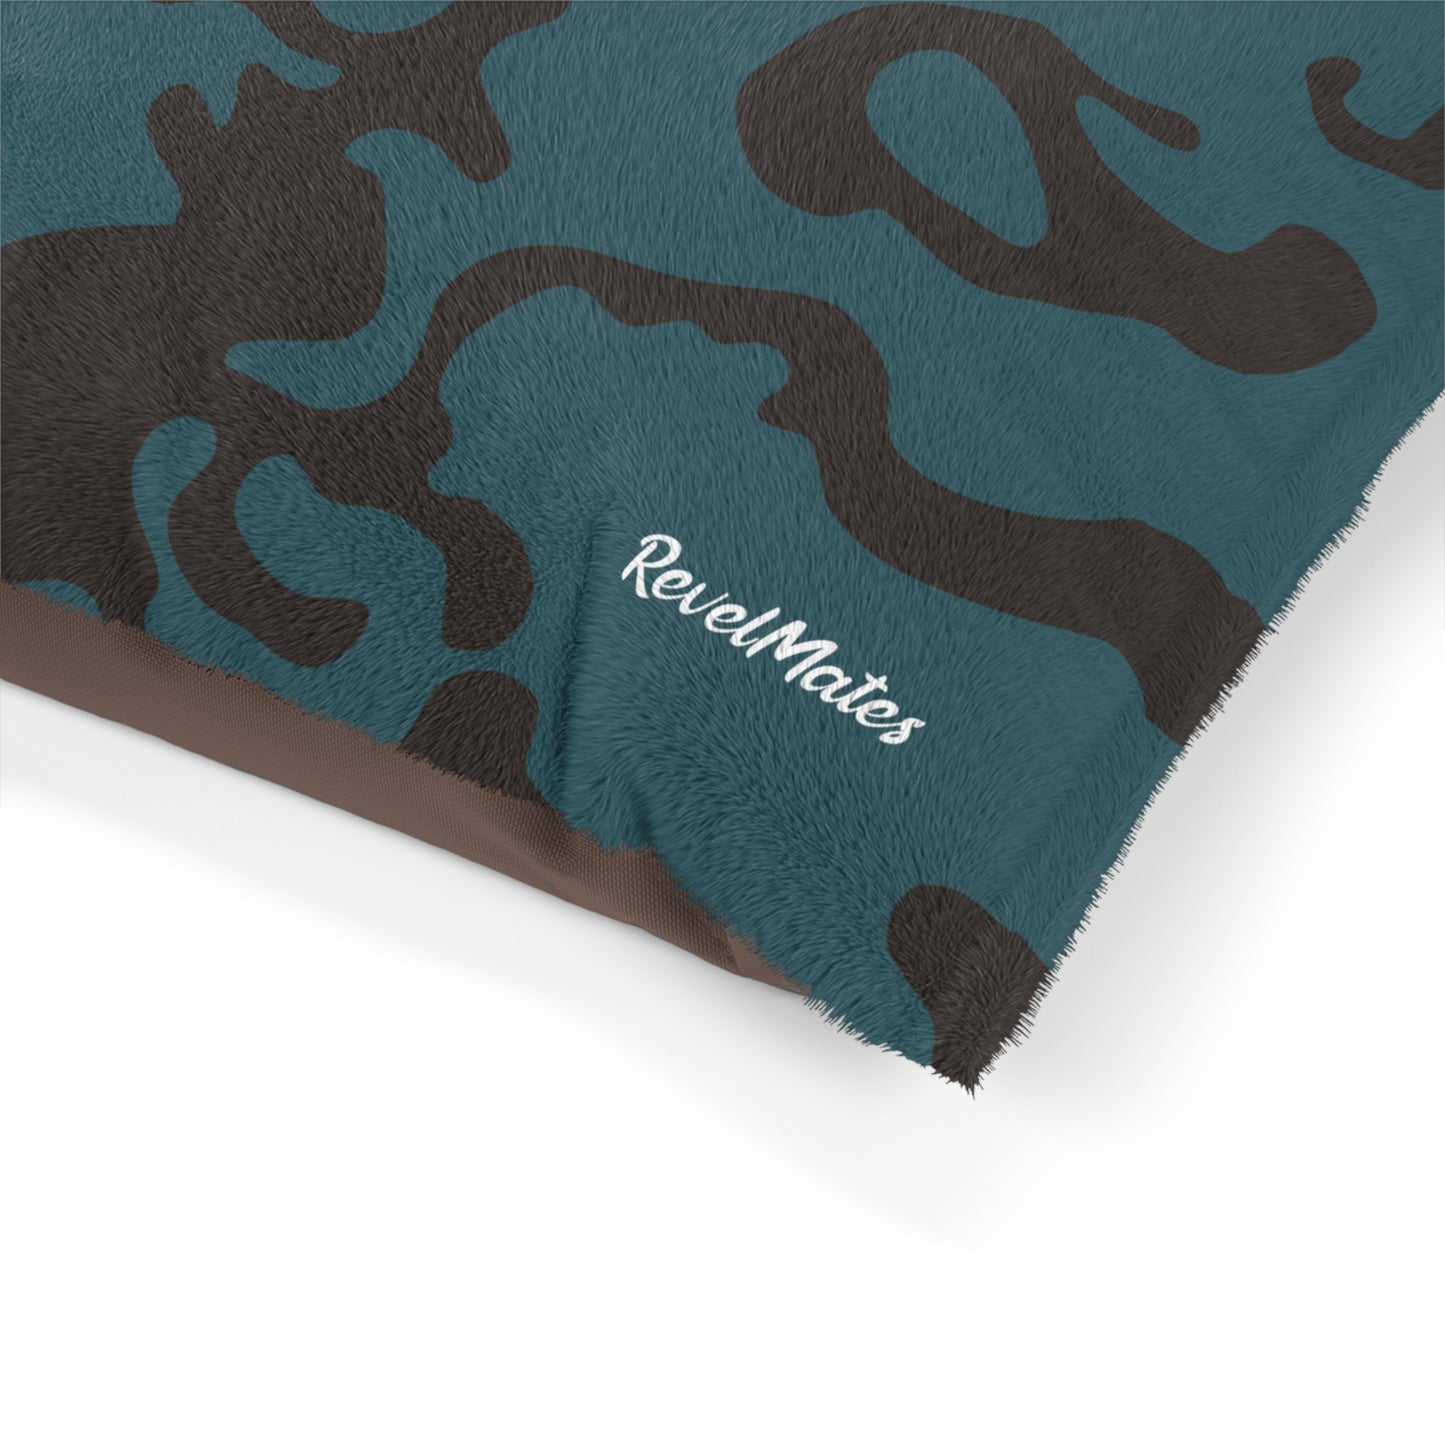 Pet Bed | for Dogs, Cats and all beloved Pets | Camouflage Turquoise & Brown Design